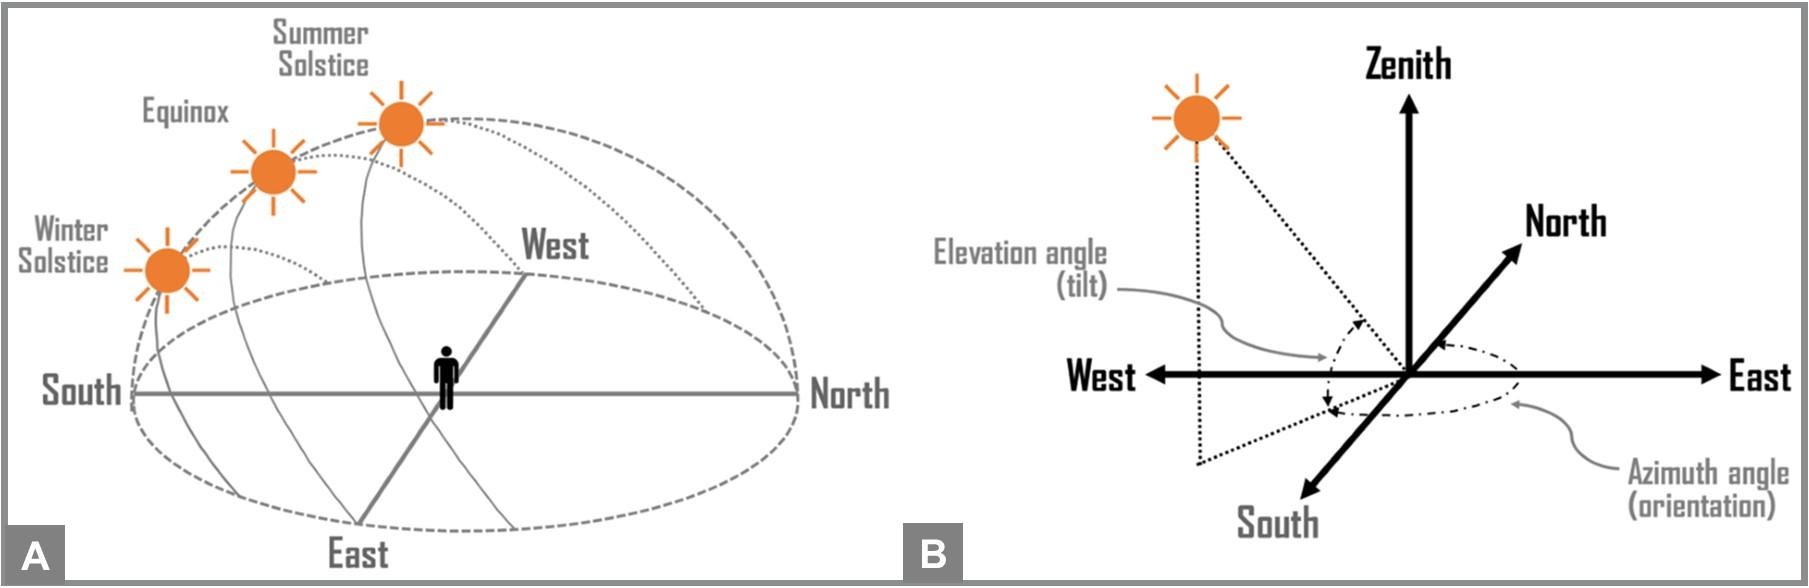 Arc of the sun’s path in the Northern Hemisphere during winter solstice, equinox, and summer solstice with the sun rising in the east, culminating in the south, and setting in the west (A, left); and illustration of the solar azimuth angle relative to a south-facing orientation and the elevation angle relative to the horizontal ground surface (B, right).